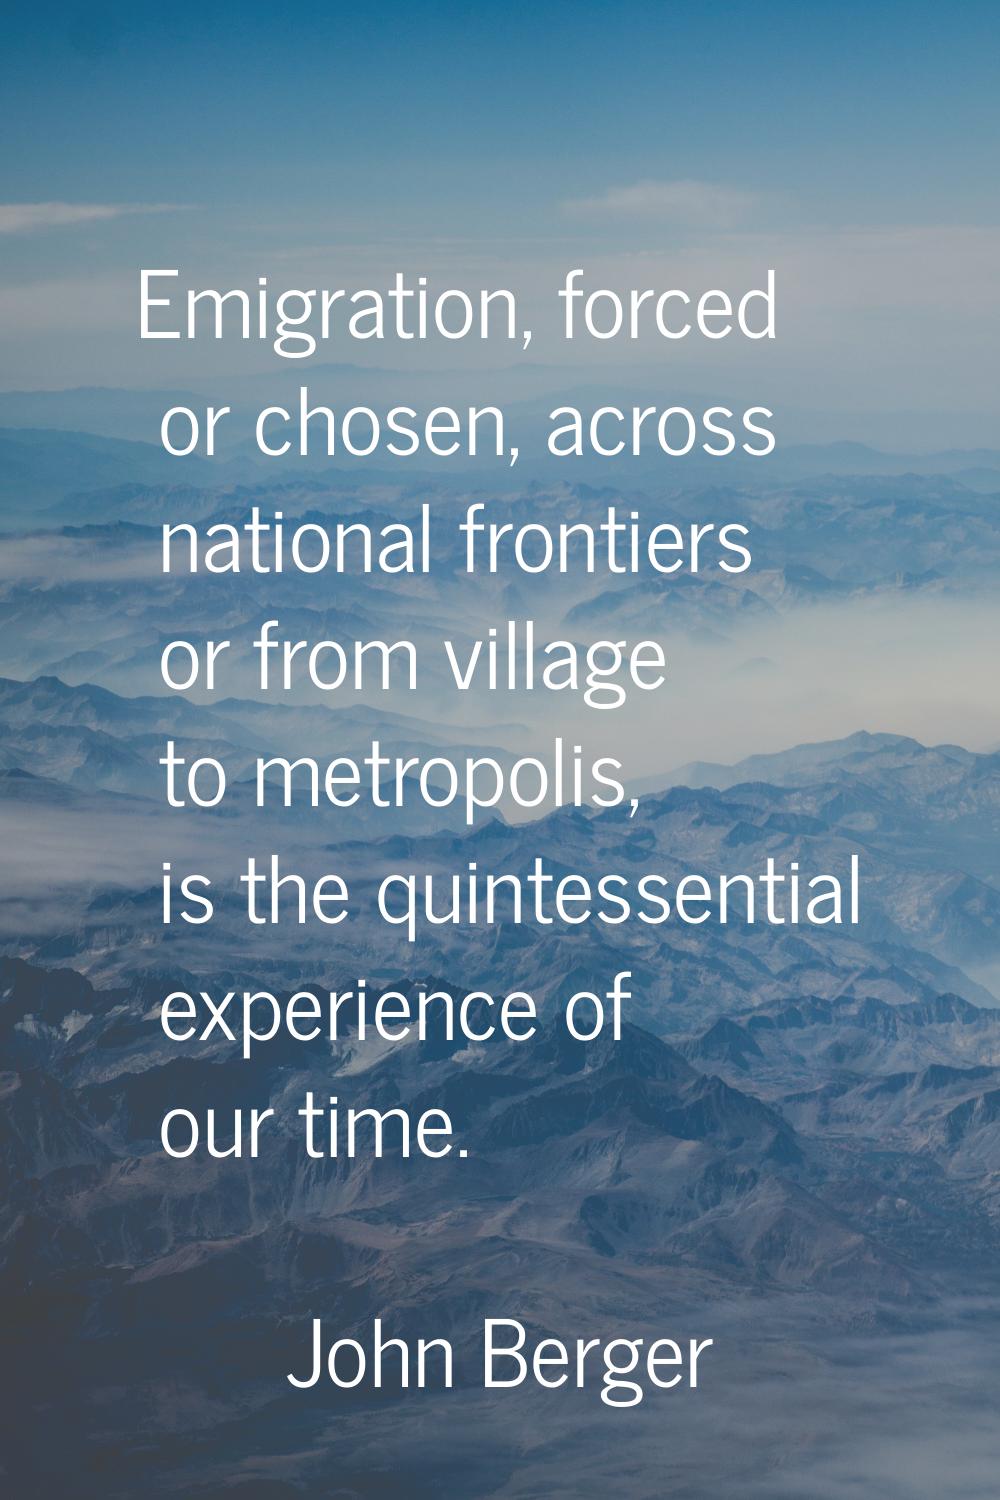 Emigration, forced or chosen, across national frontiers or from village to metropolis, is the quint